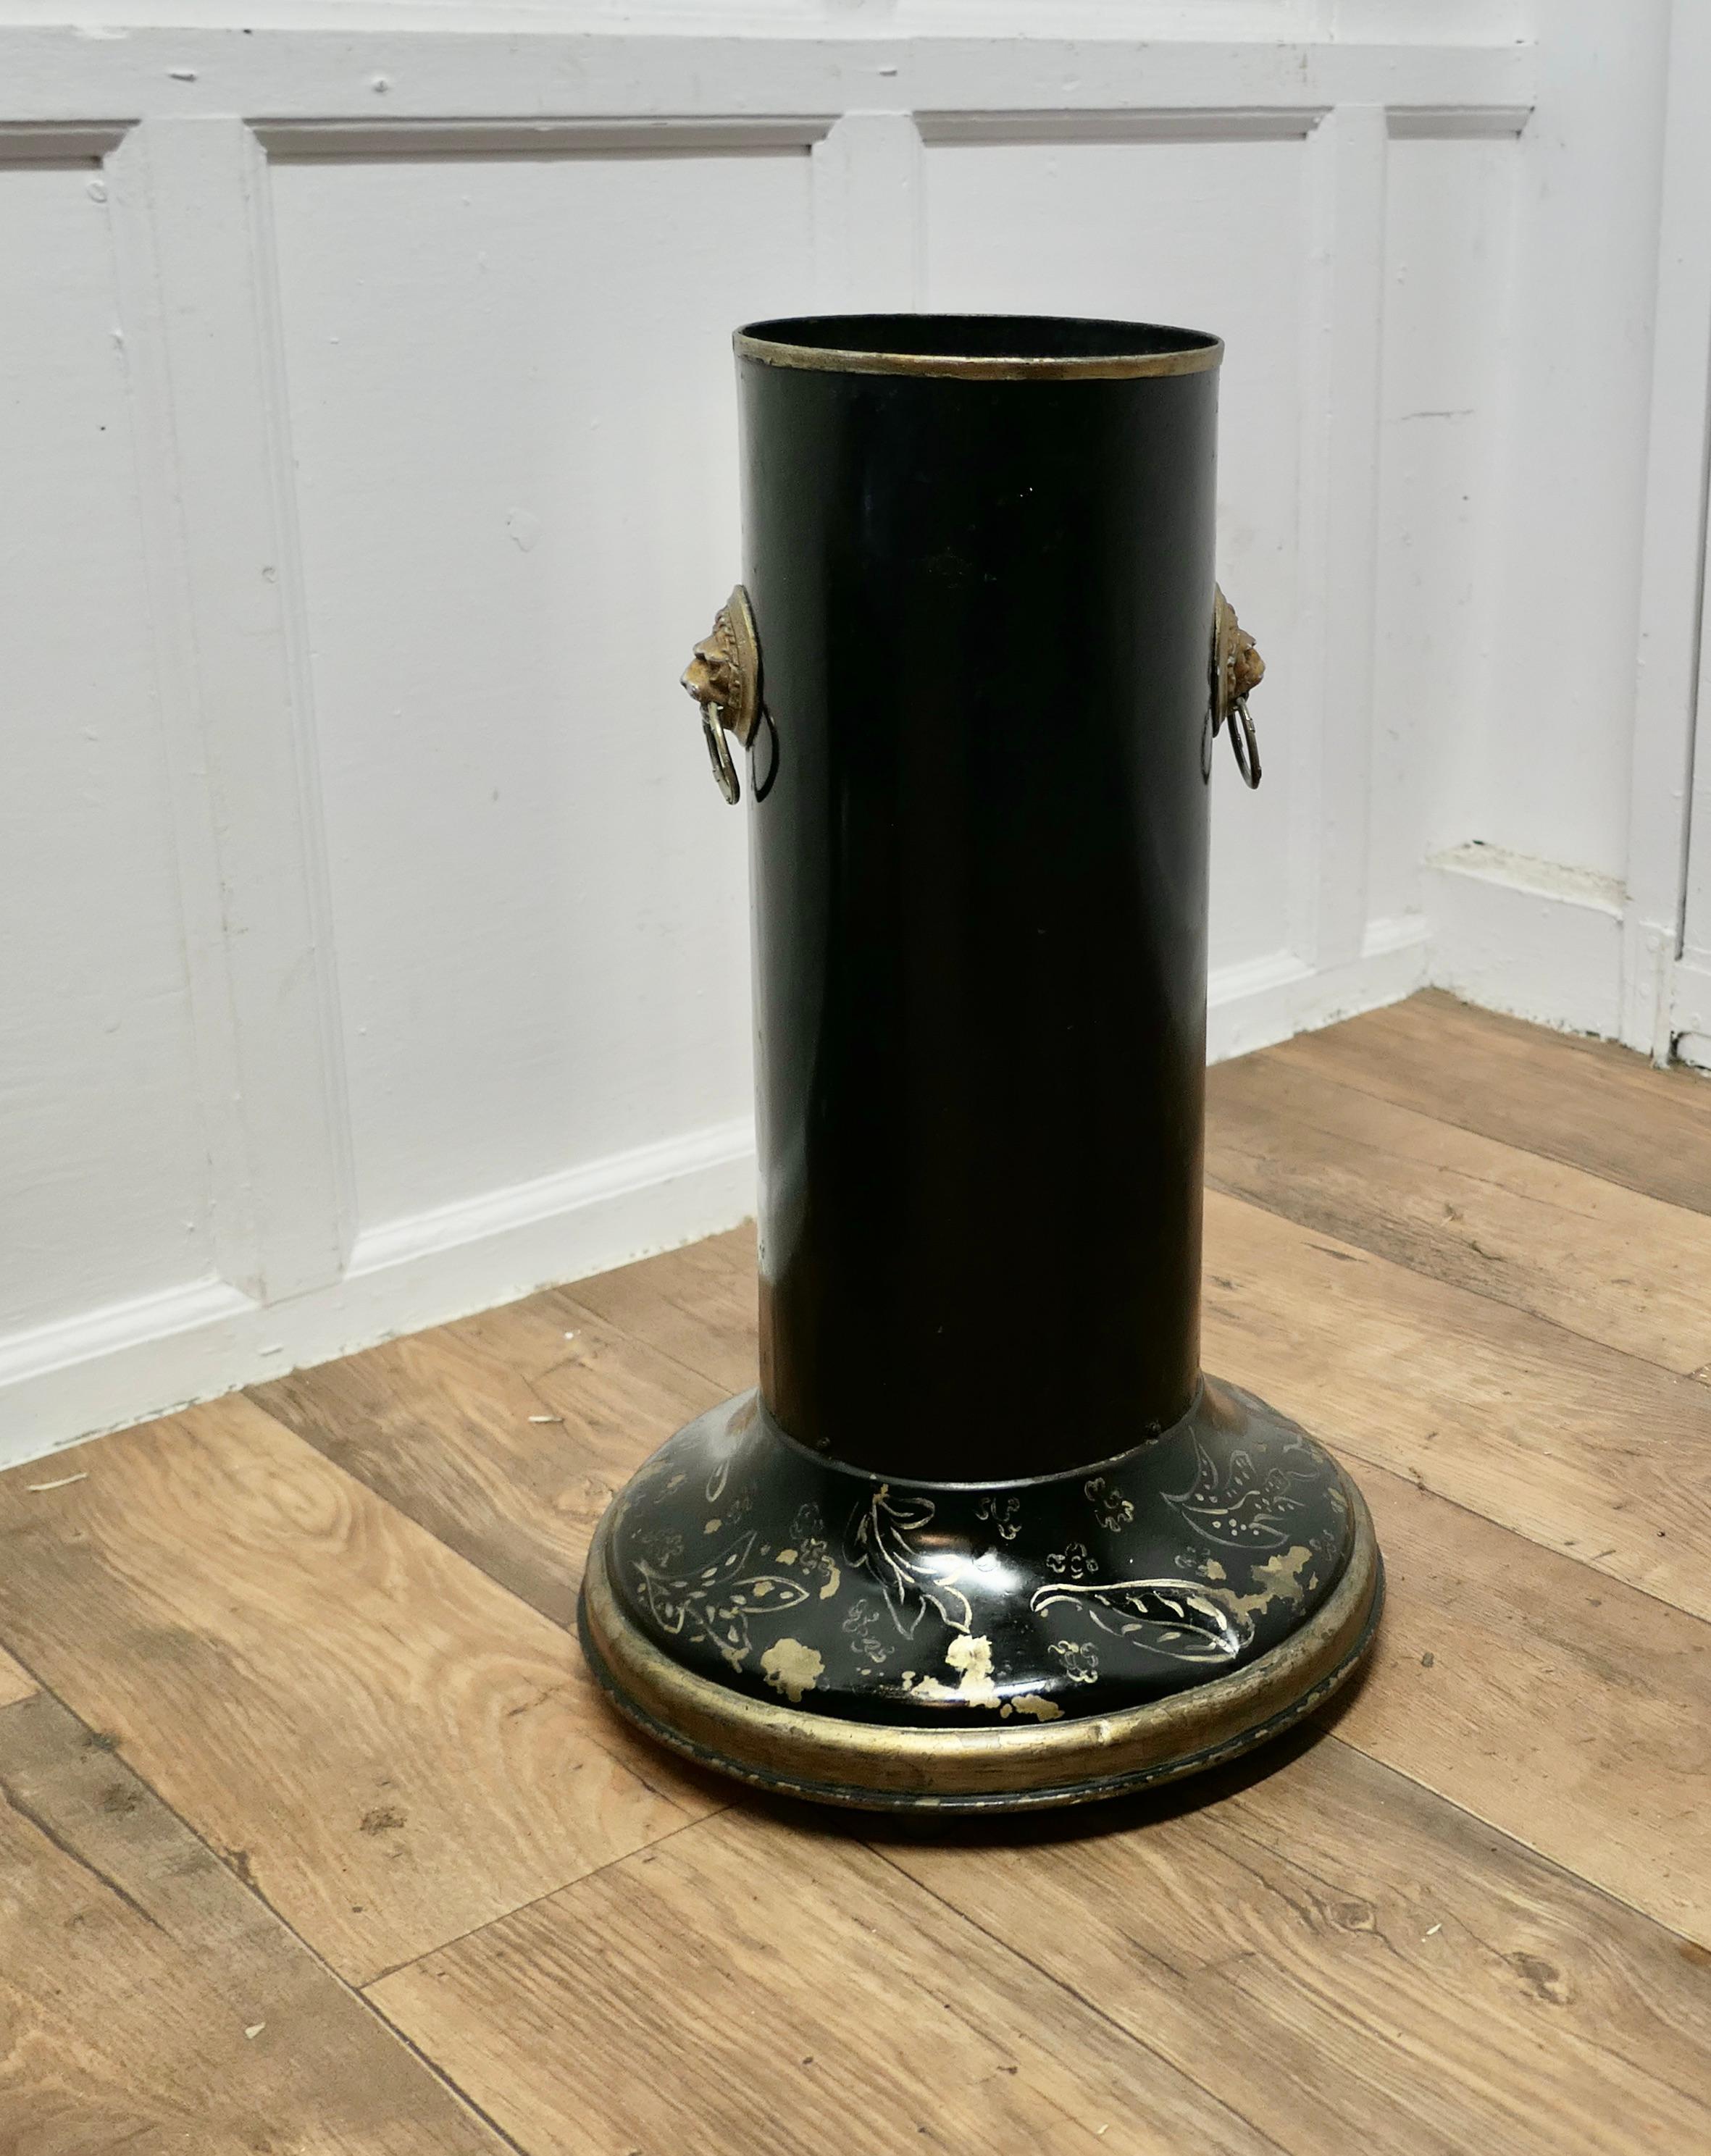 Large Lacquered Metal Stick Stand, Umbrella Stand

This  good looking piece is tall with black and gold Lacquer, with a wide heavy base and 2 lions mask handles 

The Stick stand is in good condition, it is 25” high and 8”  in diameter at the top